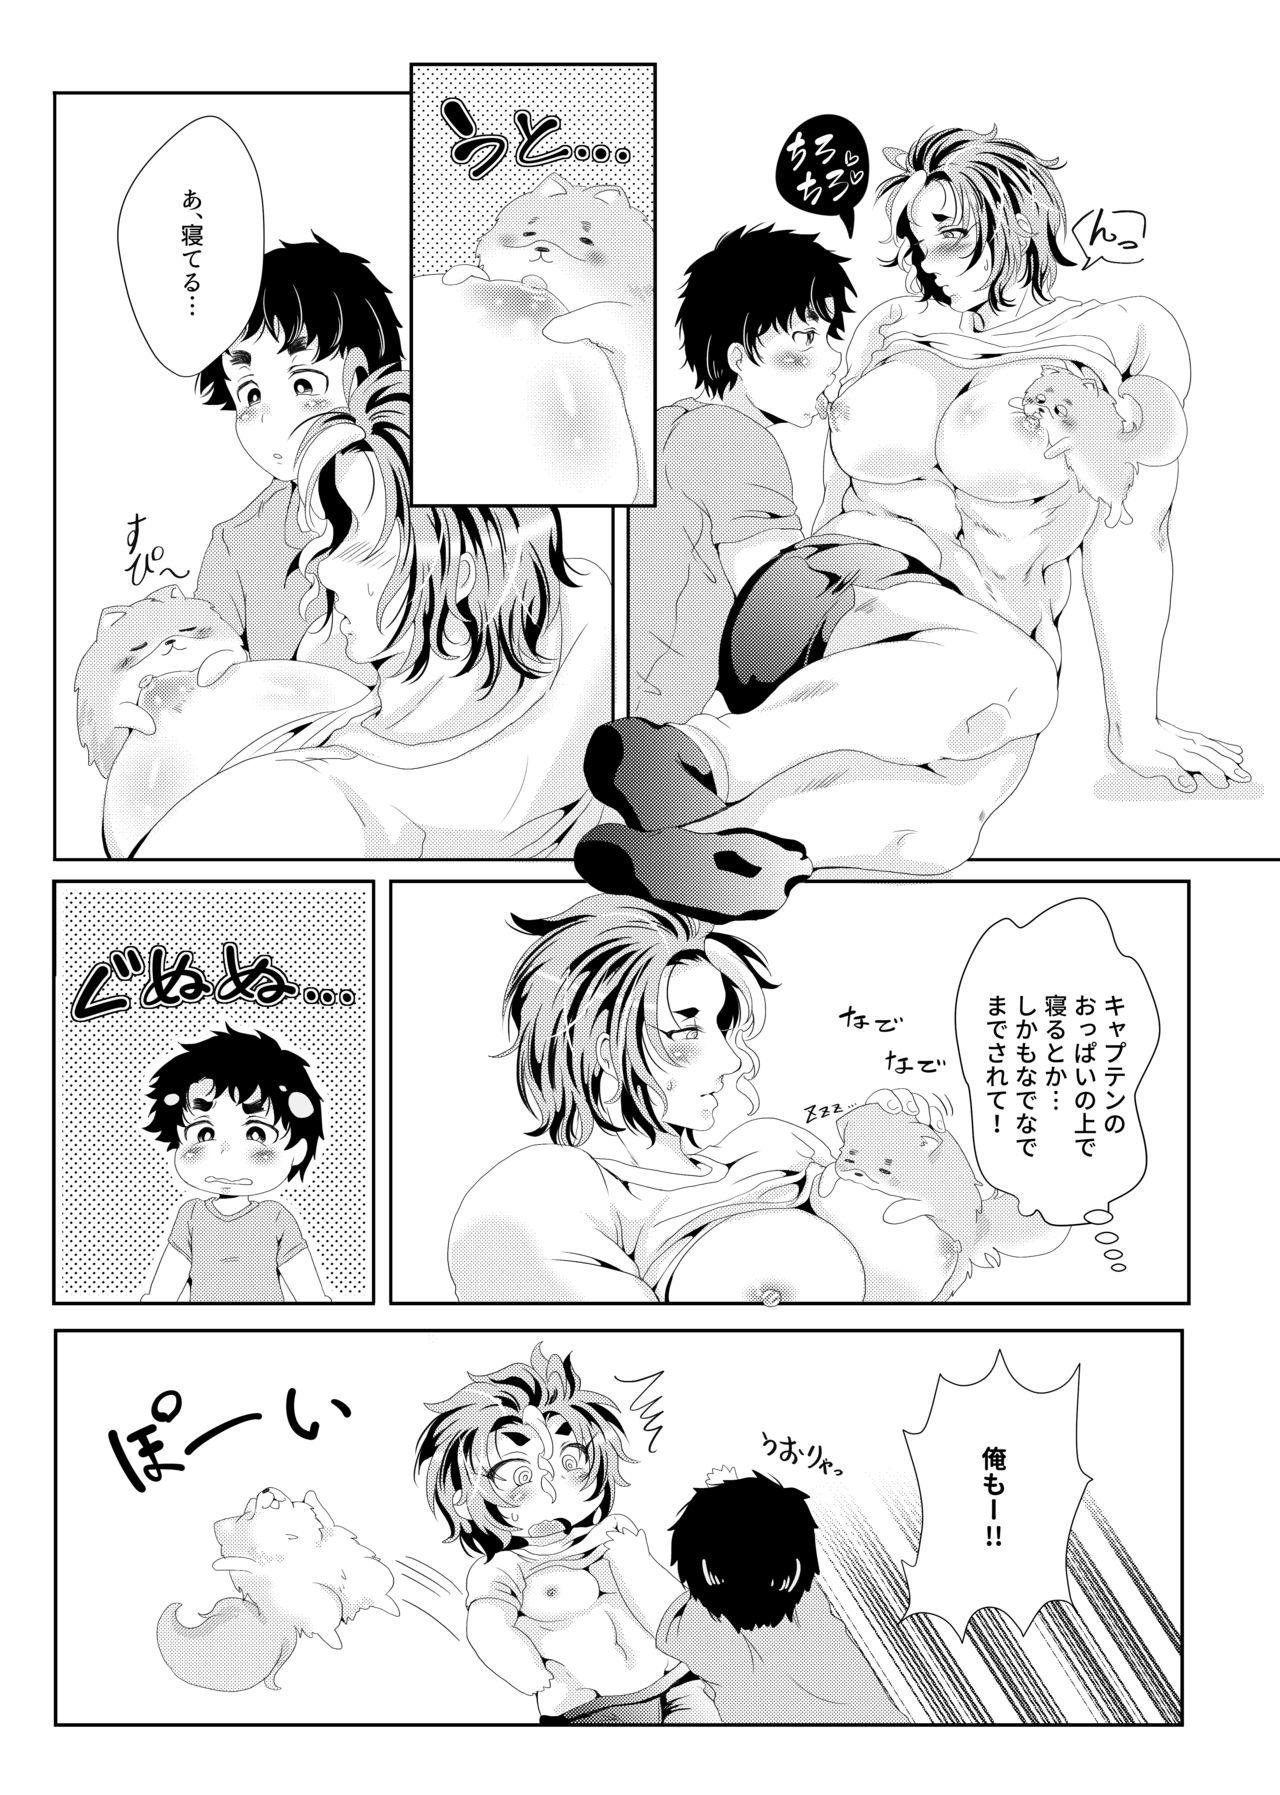 Prima Captain no Bonyuu de One Chance o Nerau - Aiming at One Chance with Captain's Breast Milk - All out Perverted - Page 11